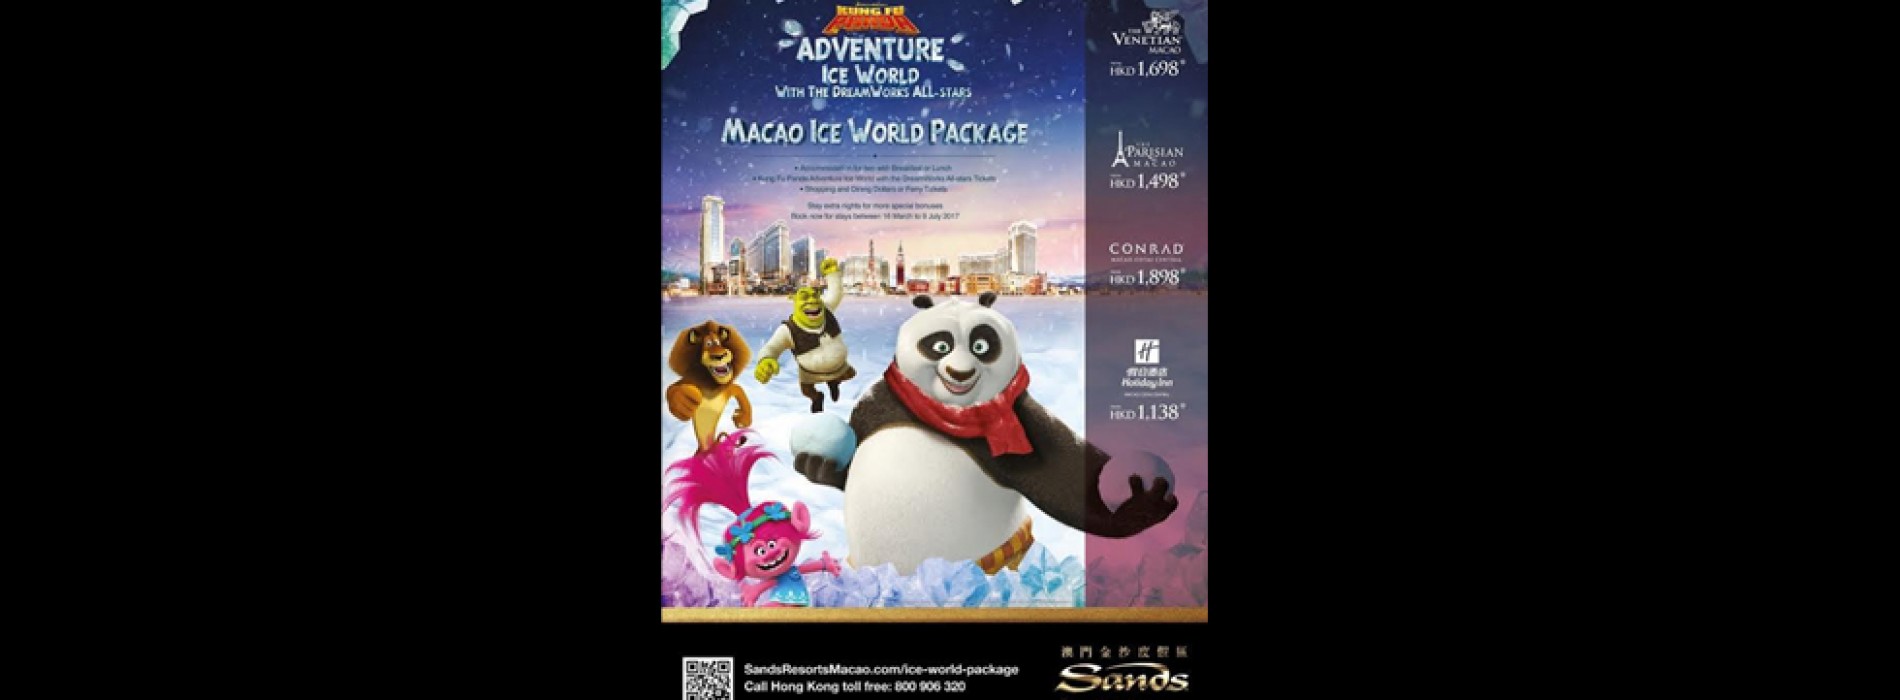 Ice World returns to The Venetian Macao – Book your stay and show tickets now